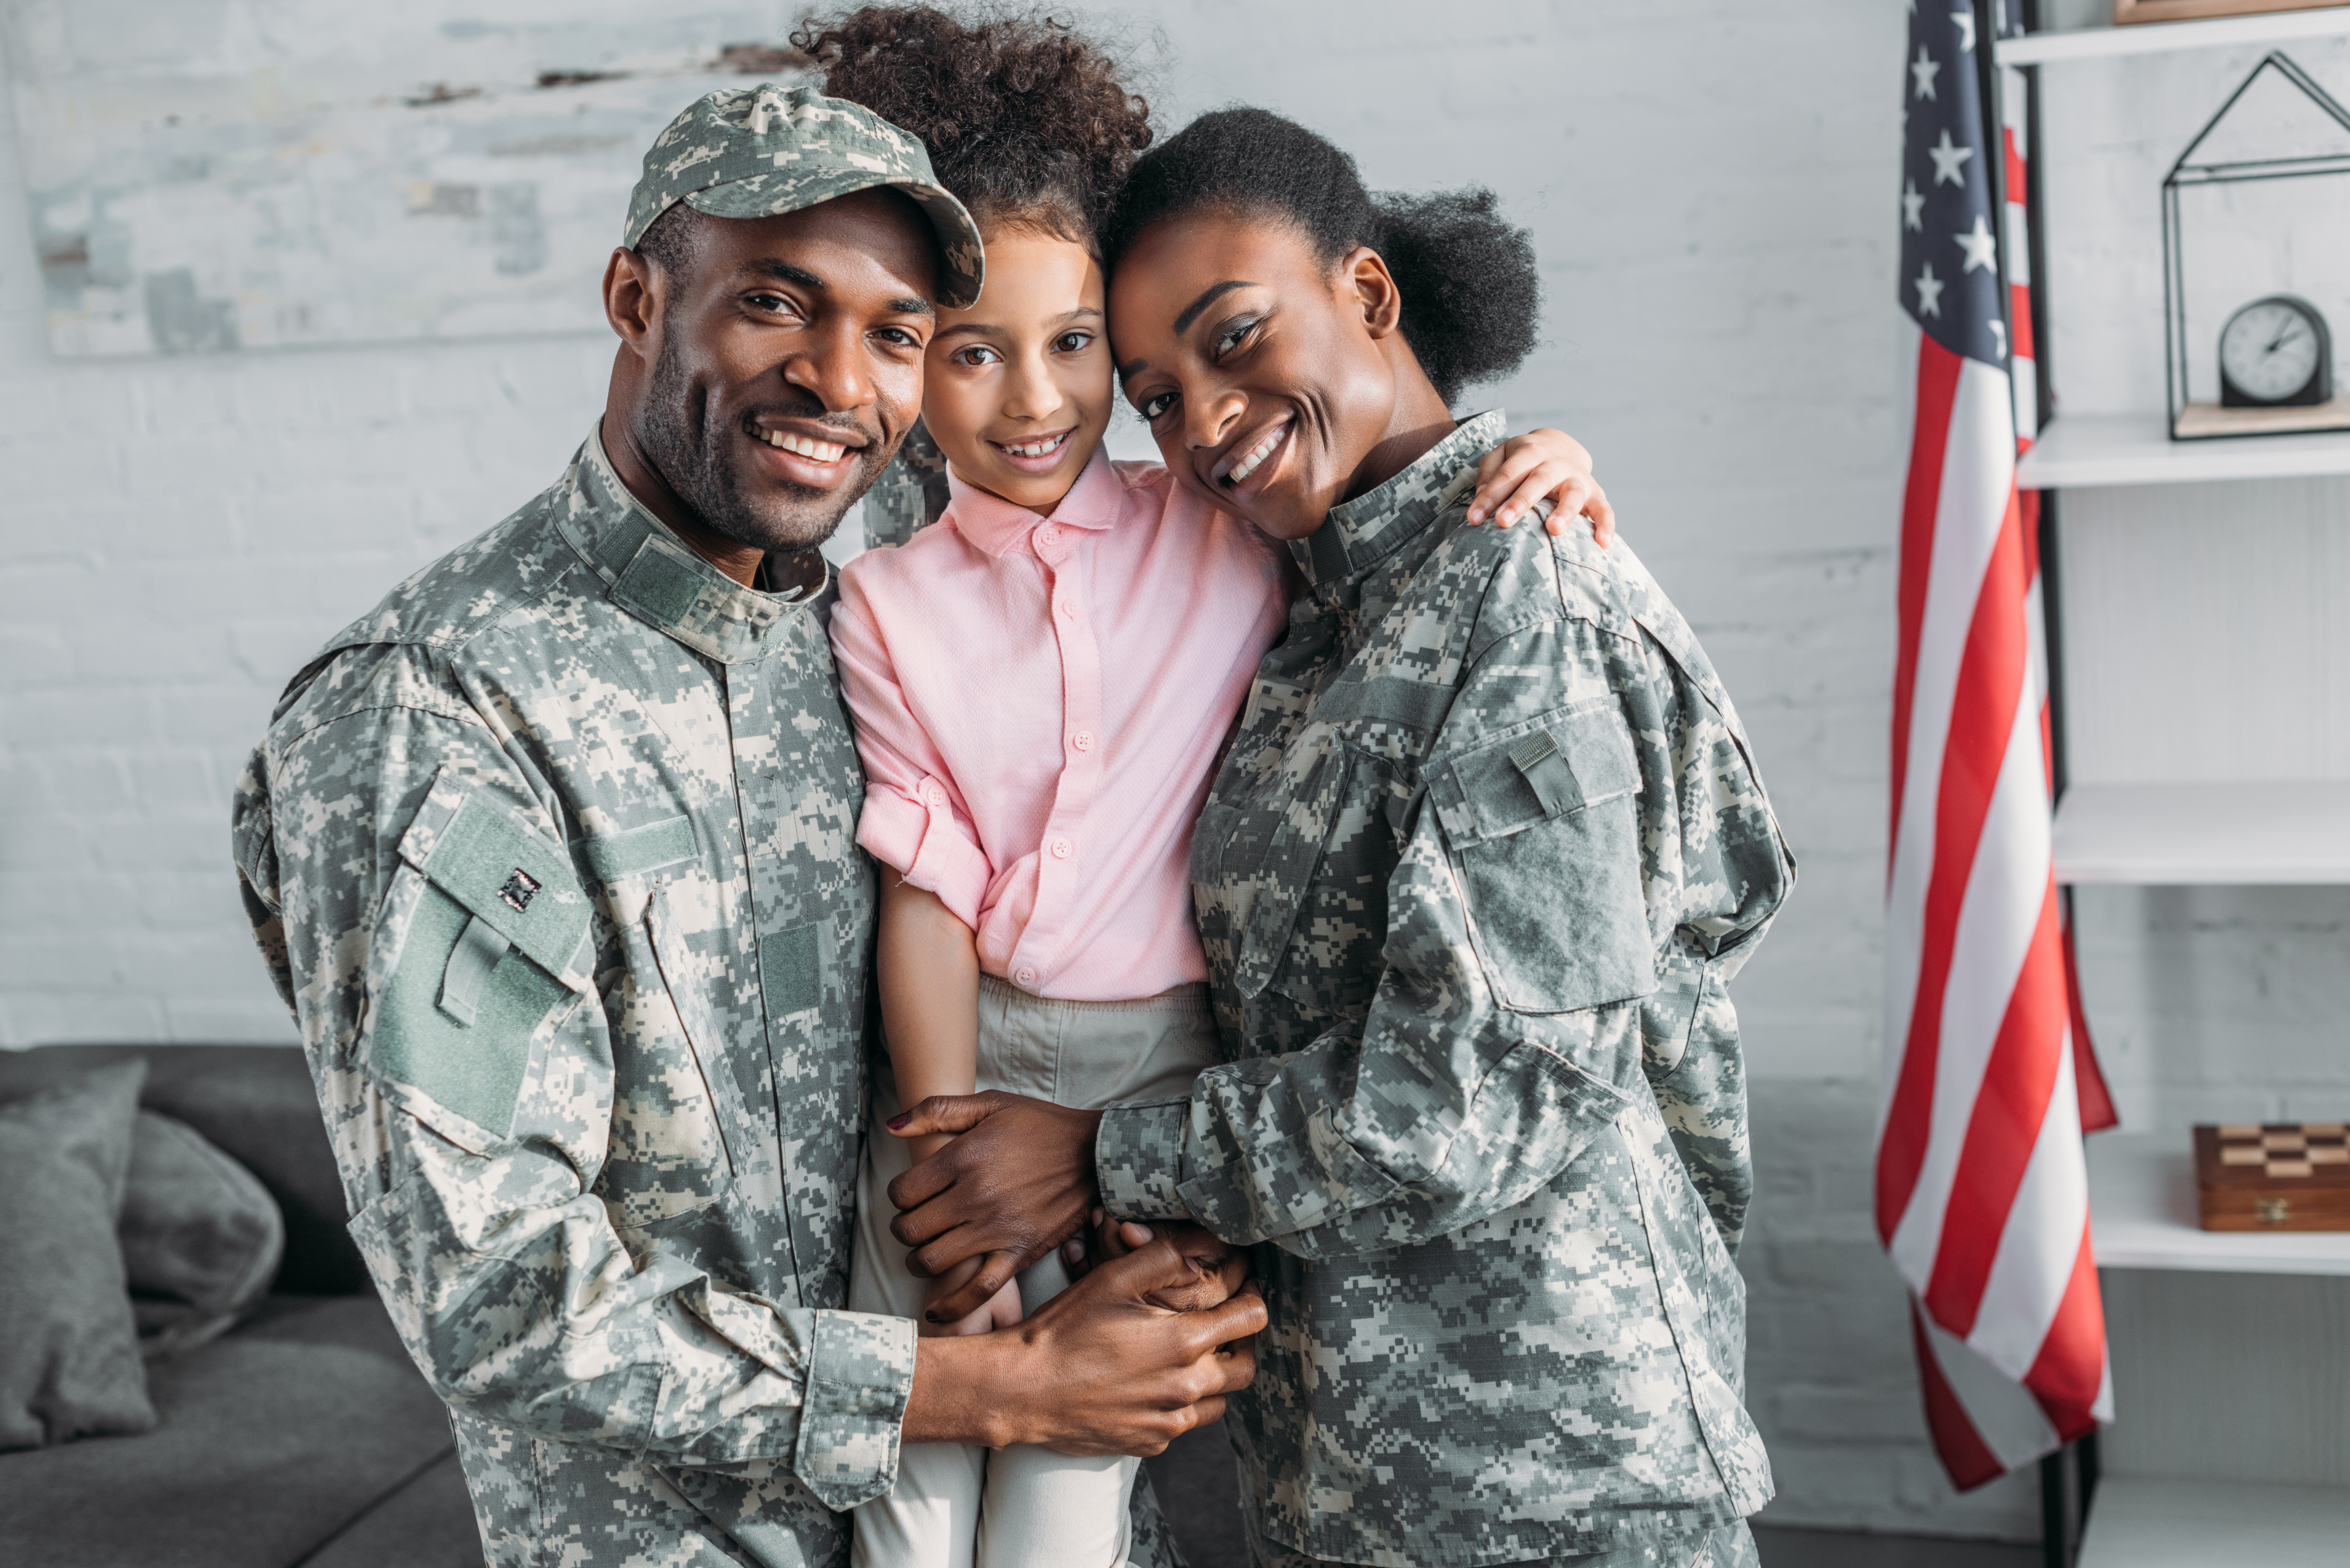 African American military family. Mom and dad in fatigues holding their adolescent daughter and smiling.